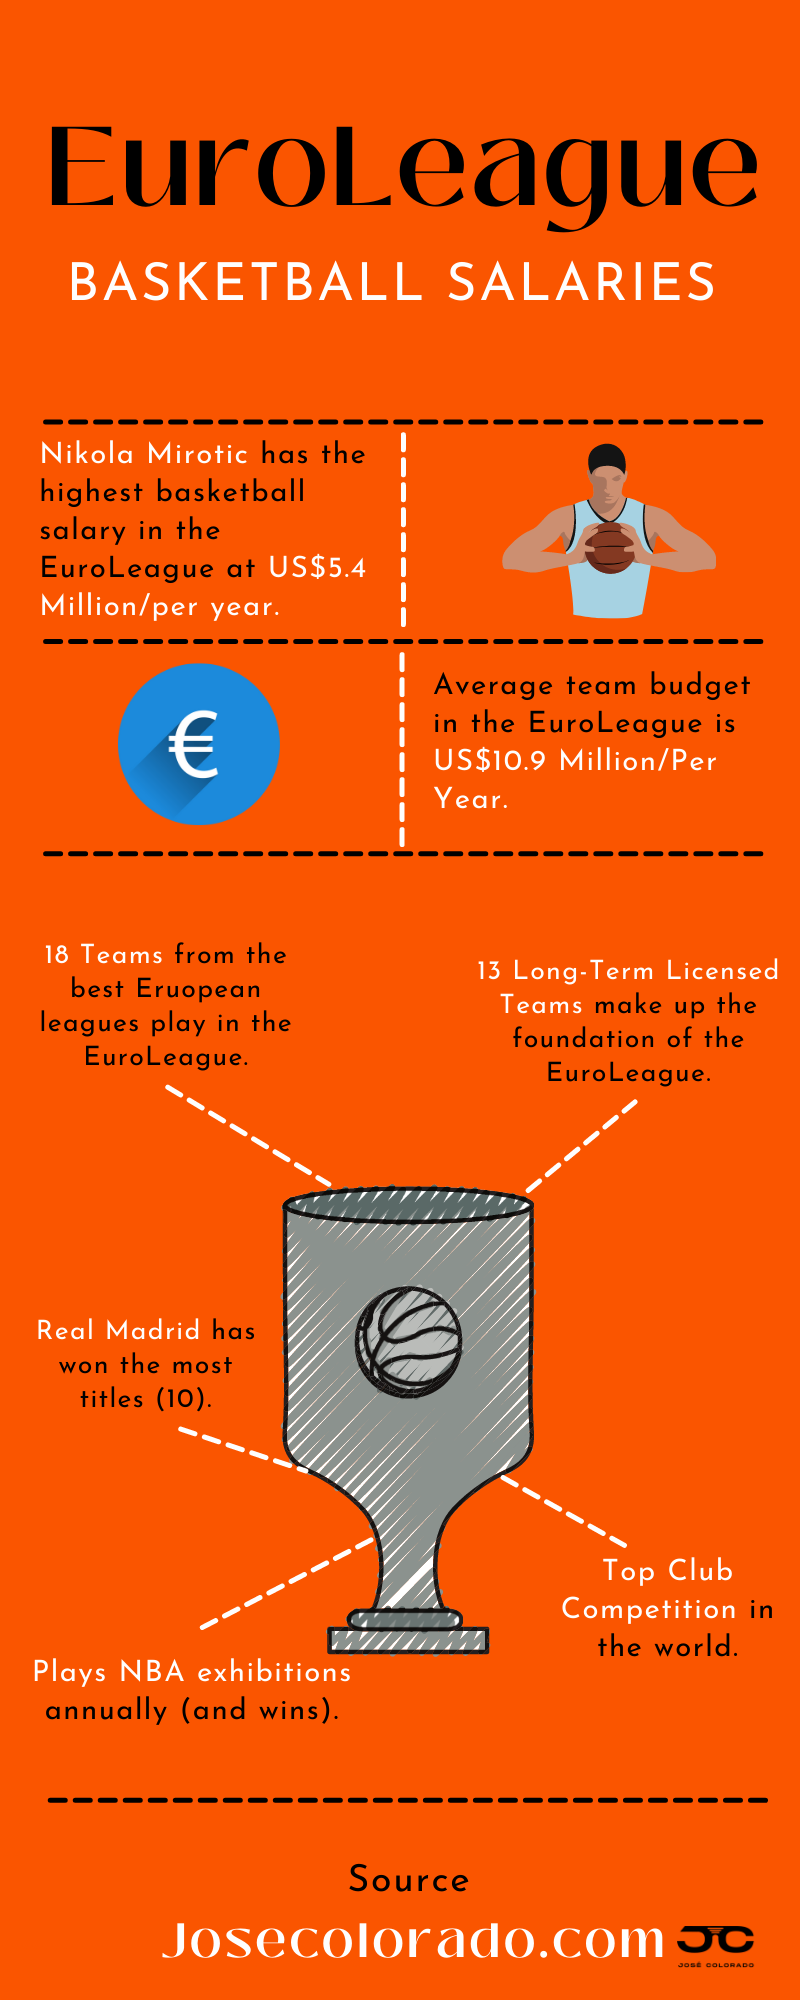 EuroLeague Basketball salaries are some of the highest in all of overseas basketball.